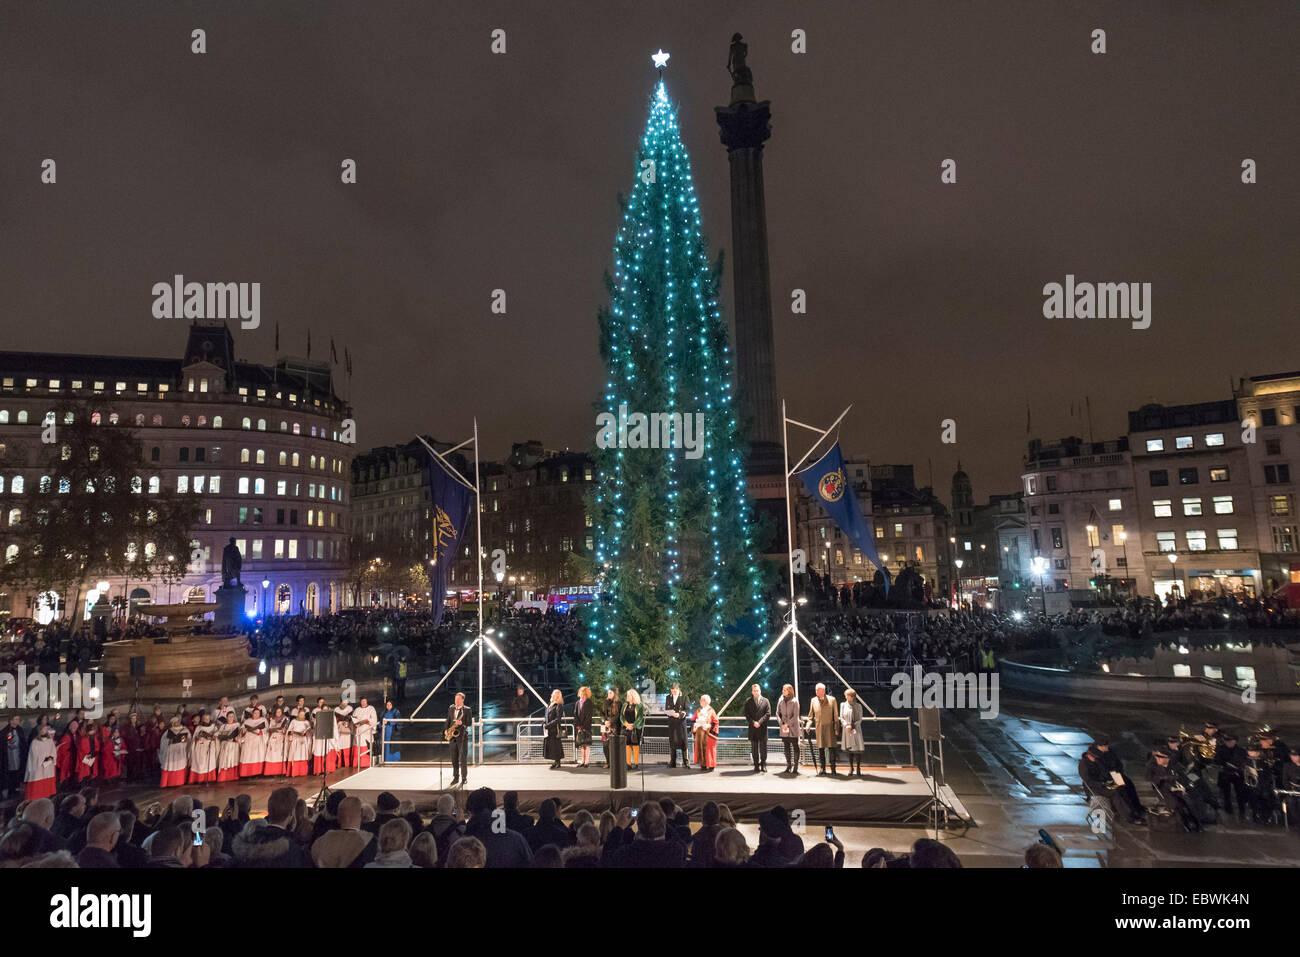 London, UK. 4th December, 2014. The annual lighting of the Trafalgar Square Christmas Tree took place today hosted by the Lord Mayor of Westminster, Cllr Audrey Lewis, who invited the Governing Mayor of Oslo to turn on the Christmas lights. The tree is donated by the City of Oslo to the people of London each year as a token of gratitude for Britain’s support during the Second World War. Pictured: Crowds gather around the Christmas tree in Trafalgar Square. Credit:  Lee Thomas/Alamy Live News Stock Photo